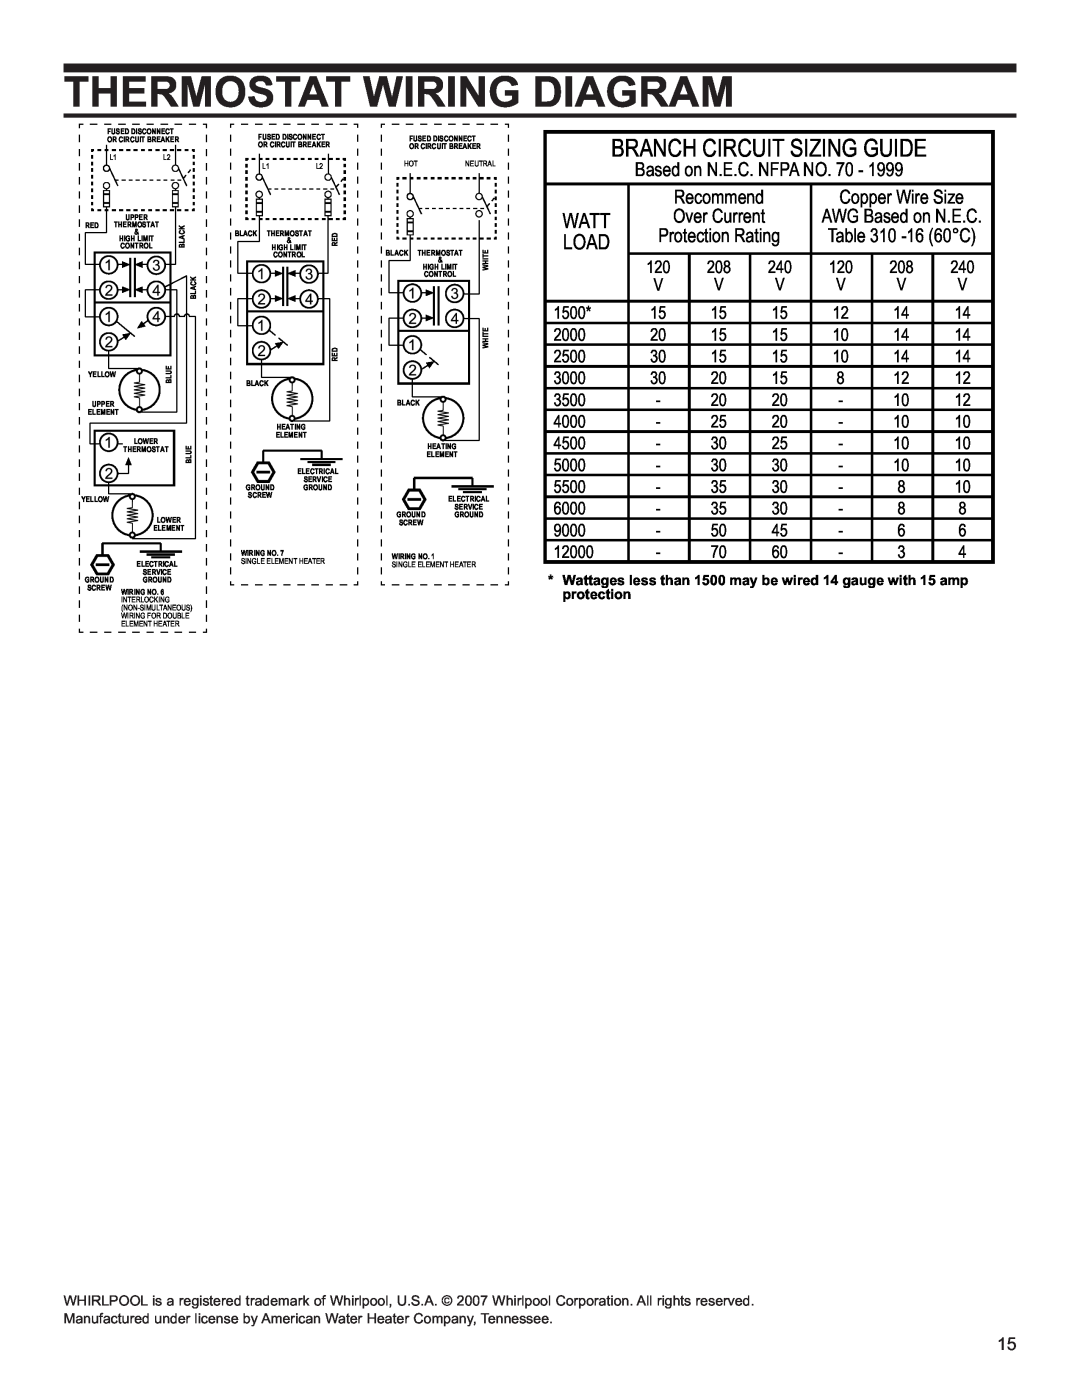 Whirlpool 121802 Thermostat Wiring Diagram, Branch Circuit Sizing Guide, Watt, Load, Based on N.E.C. NFPA NO, Recommend 